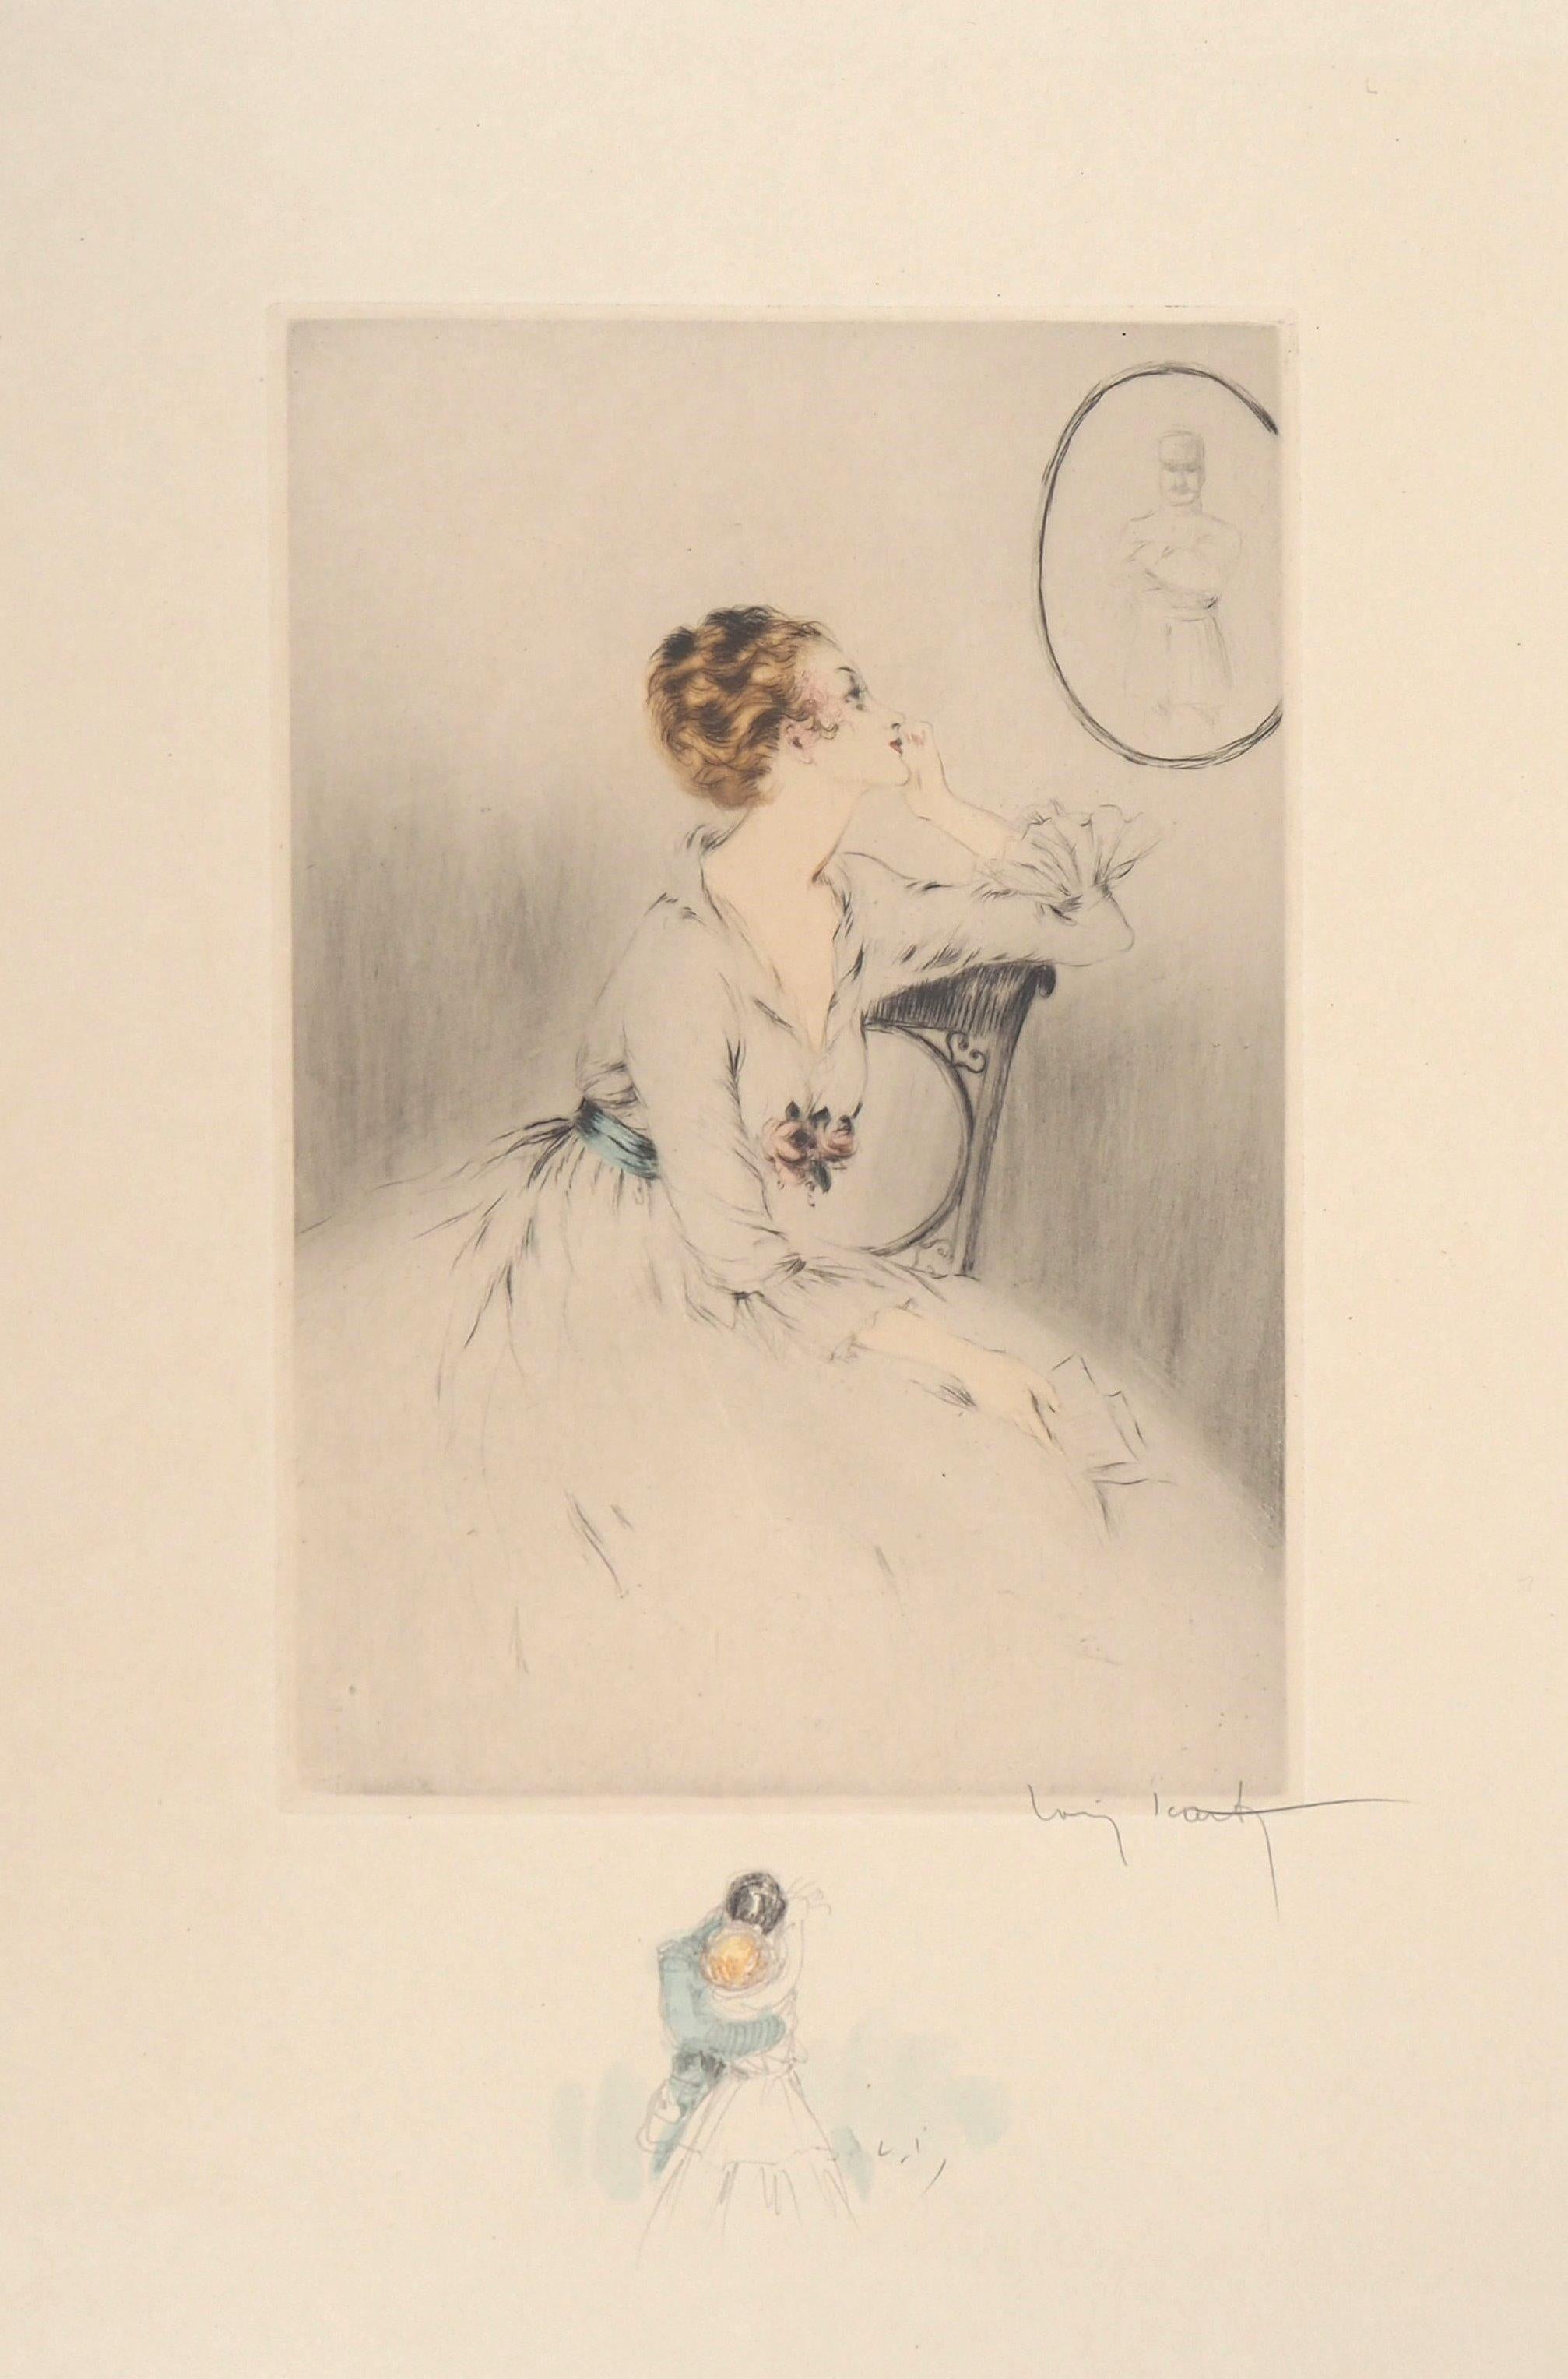 Louis Icart Figurative Print - Wife Waiting for Her Husband - Original Handsigned Etching & Watercolor